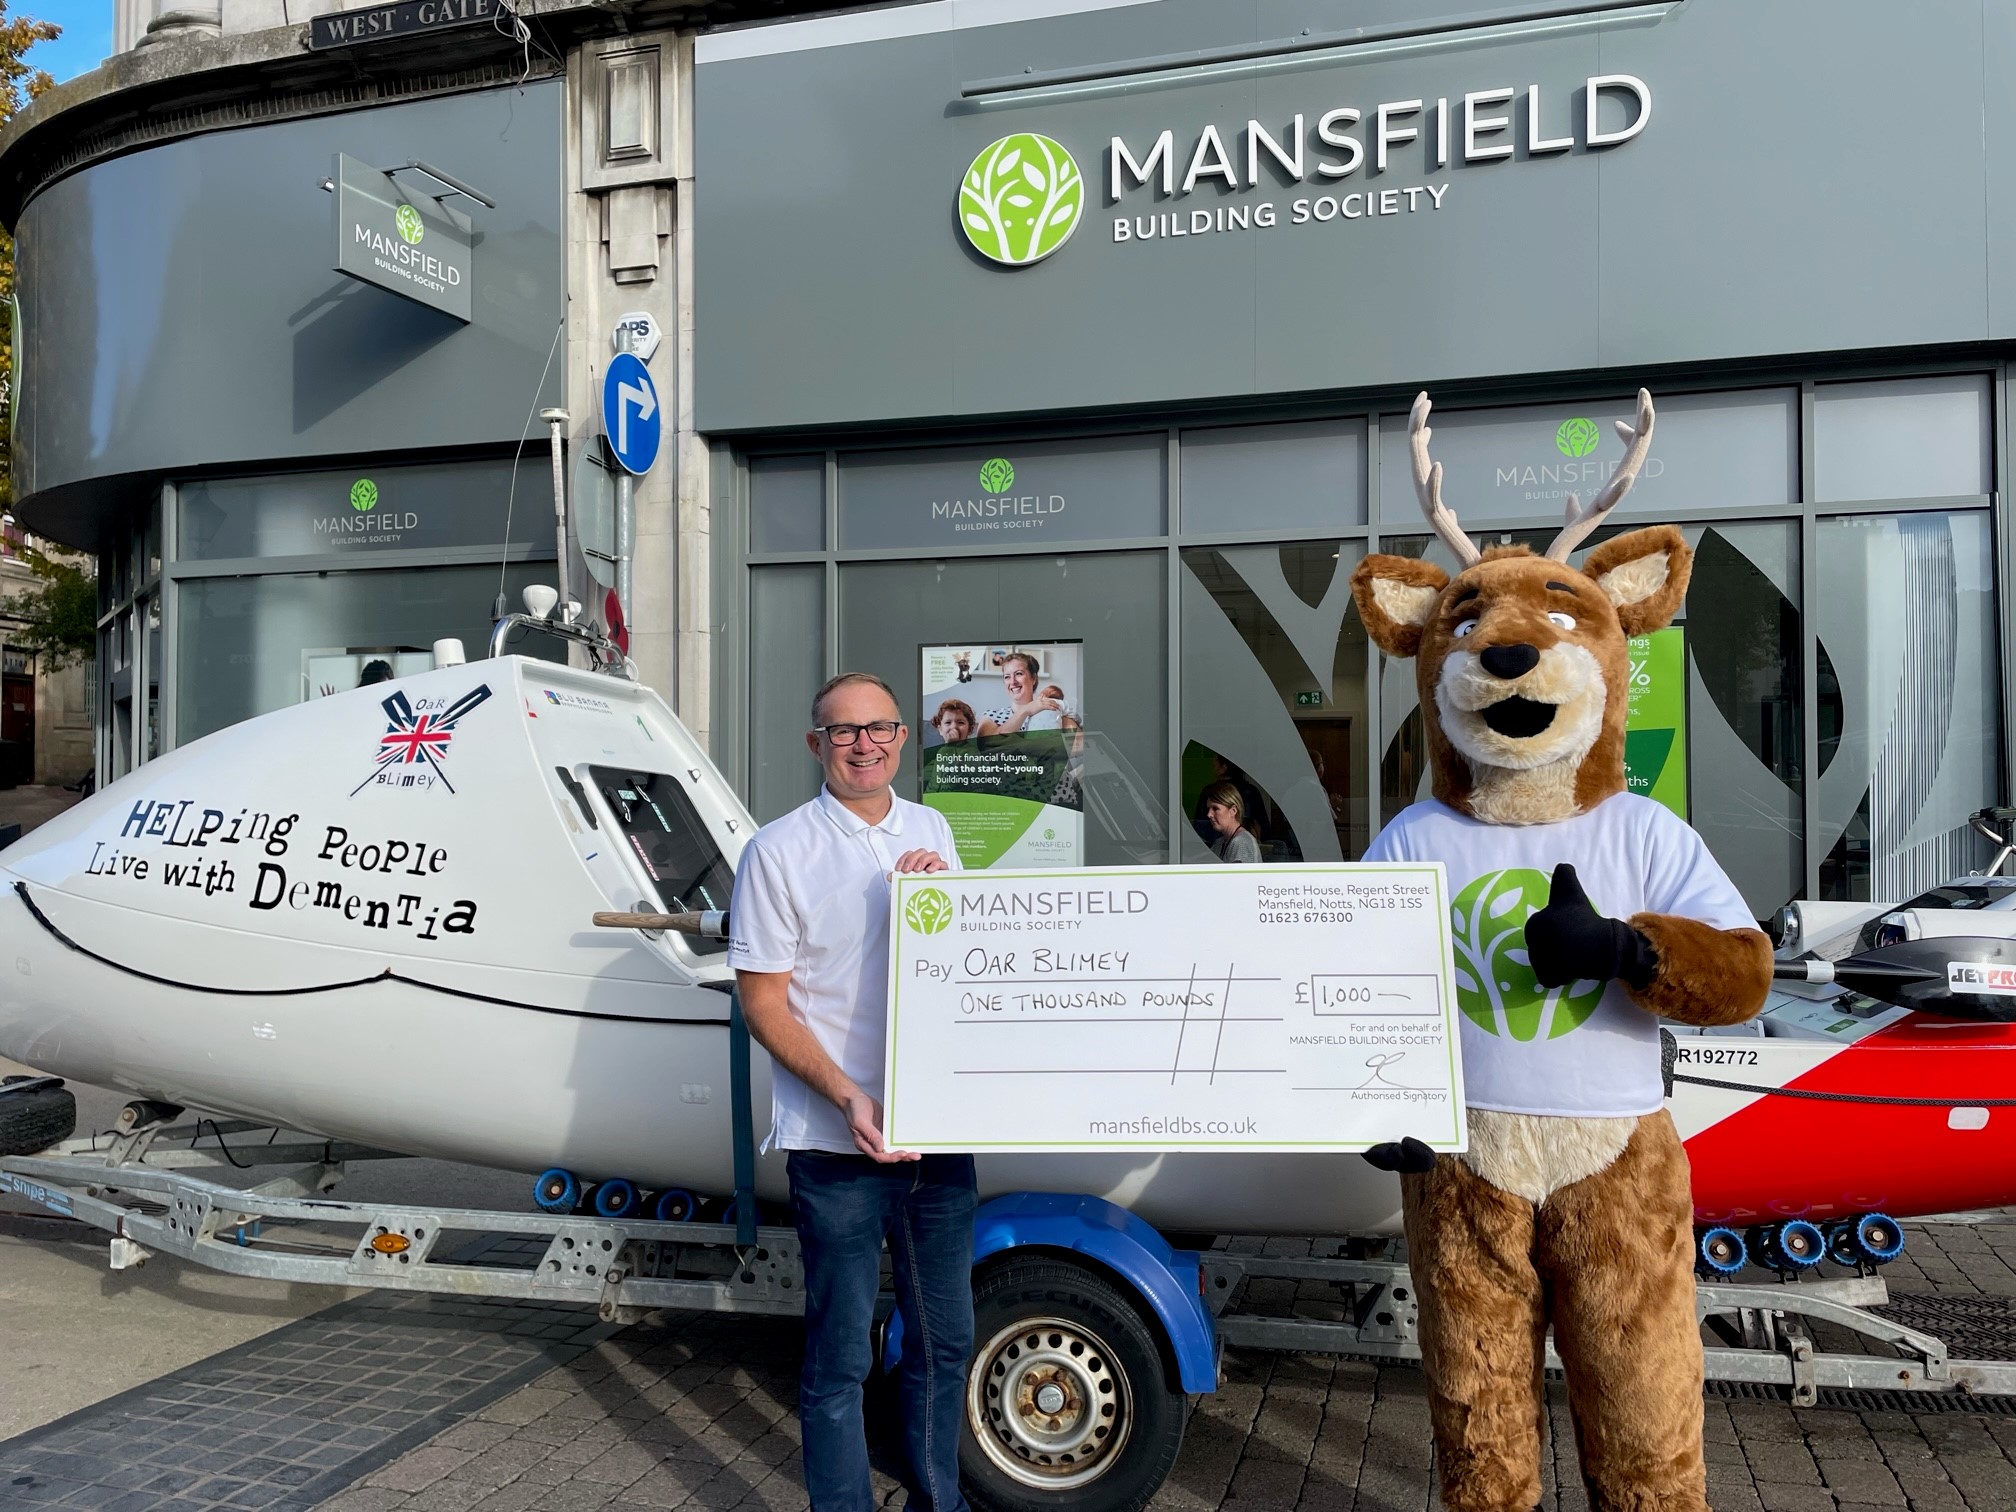 Stanley Stag cheque presentation with rowing boat outside a Mansfield Building Society branch